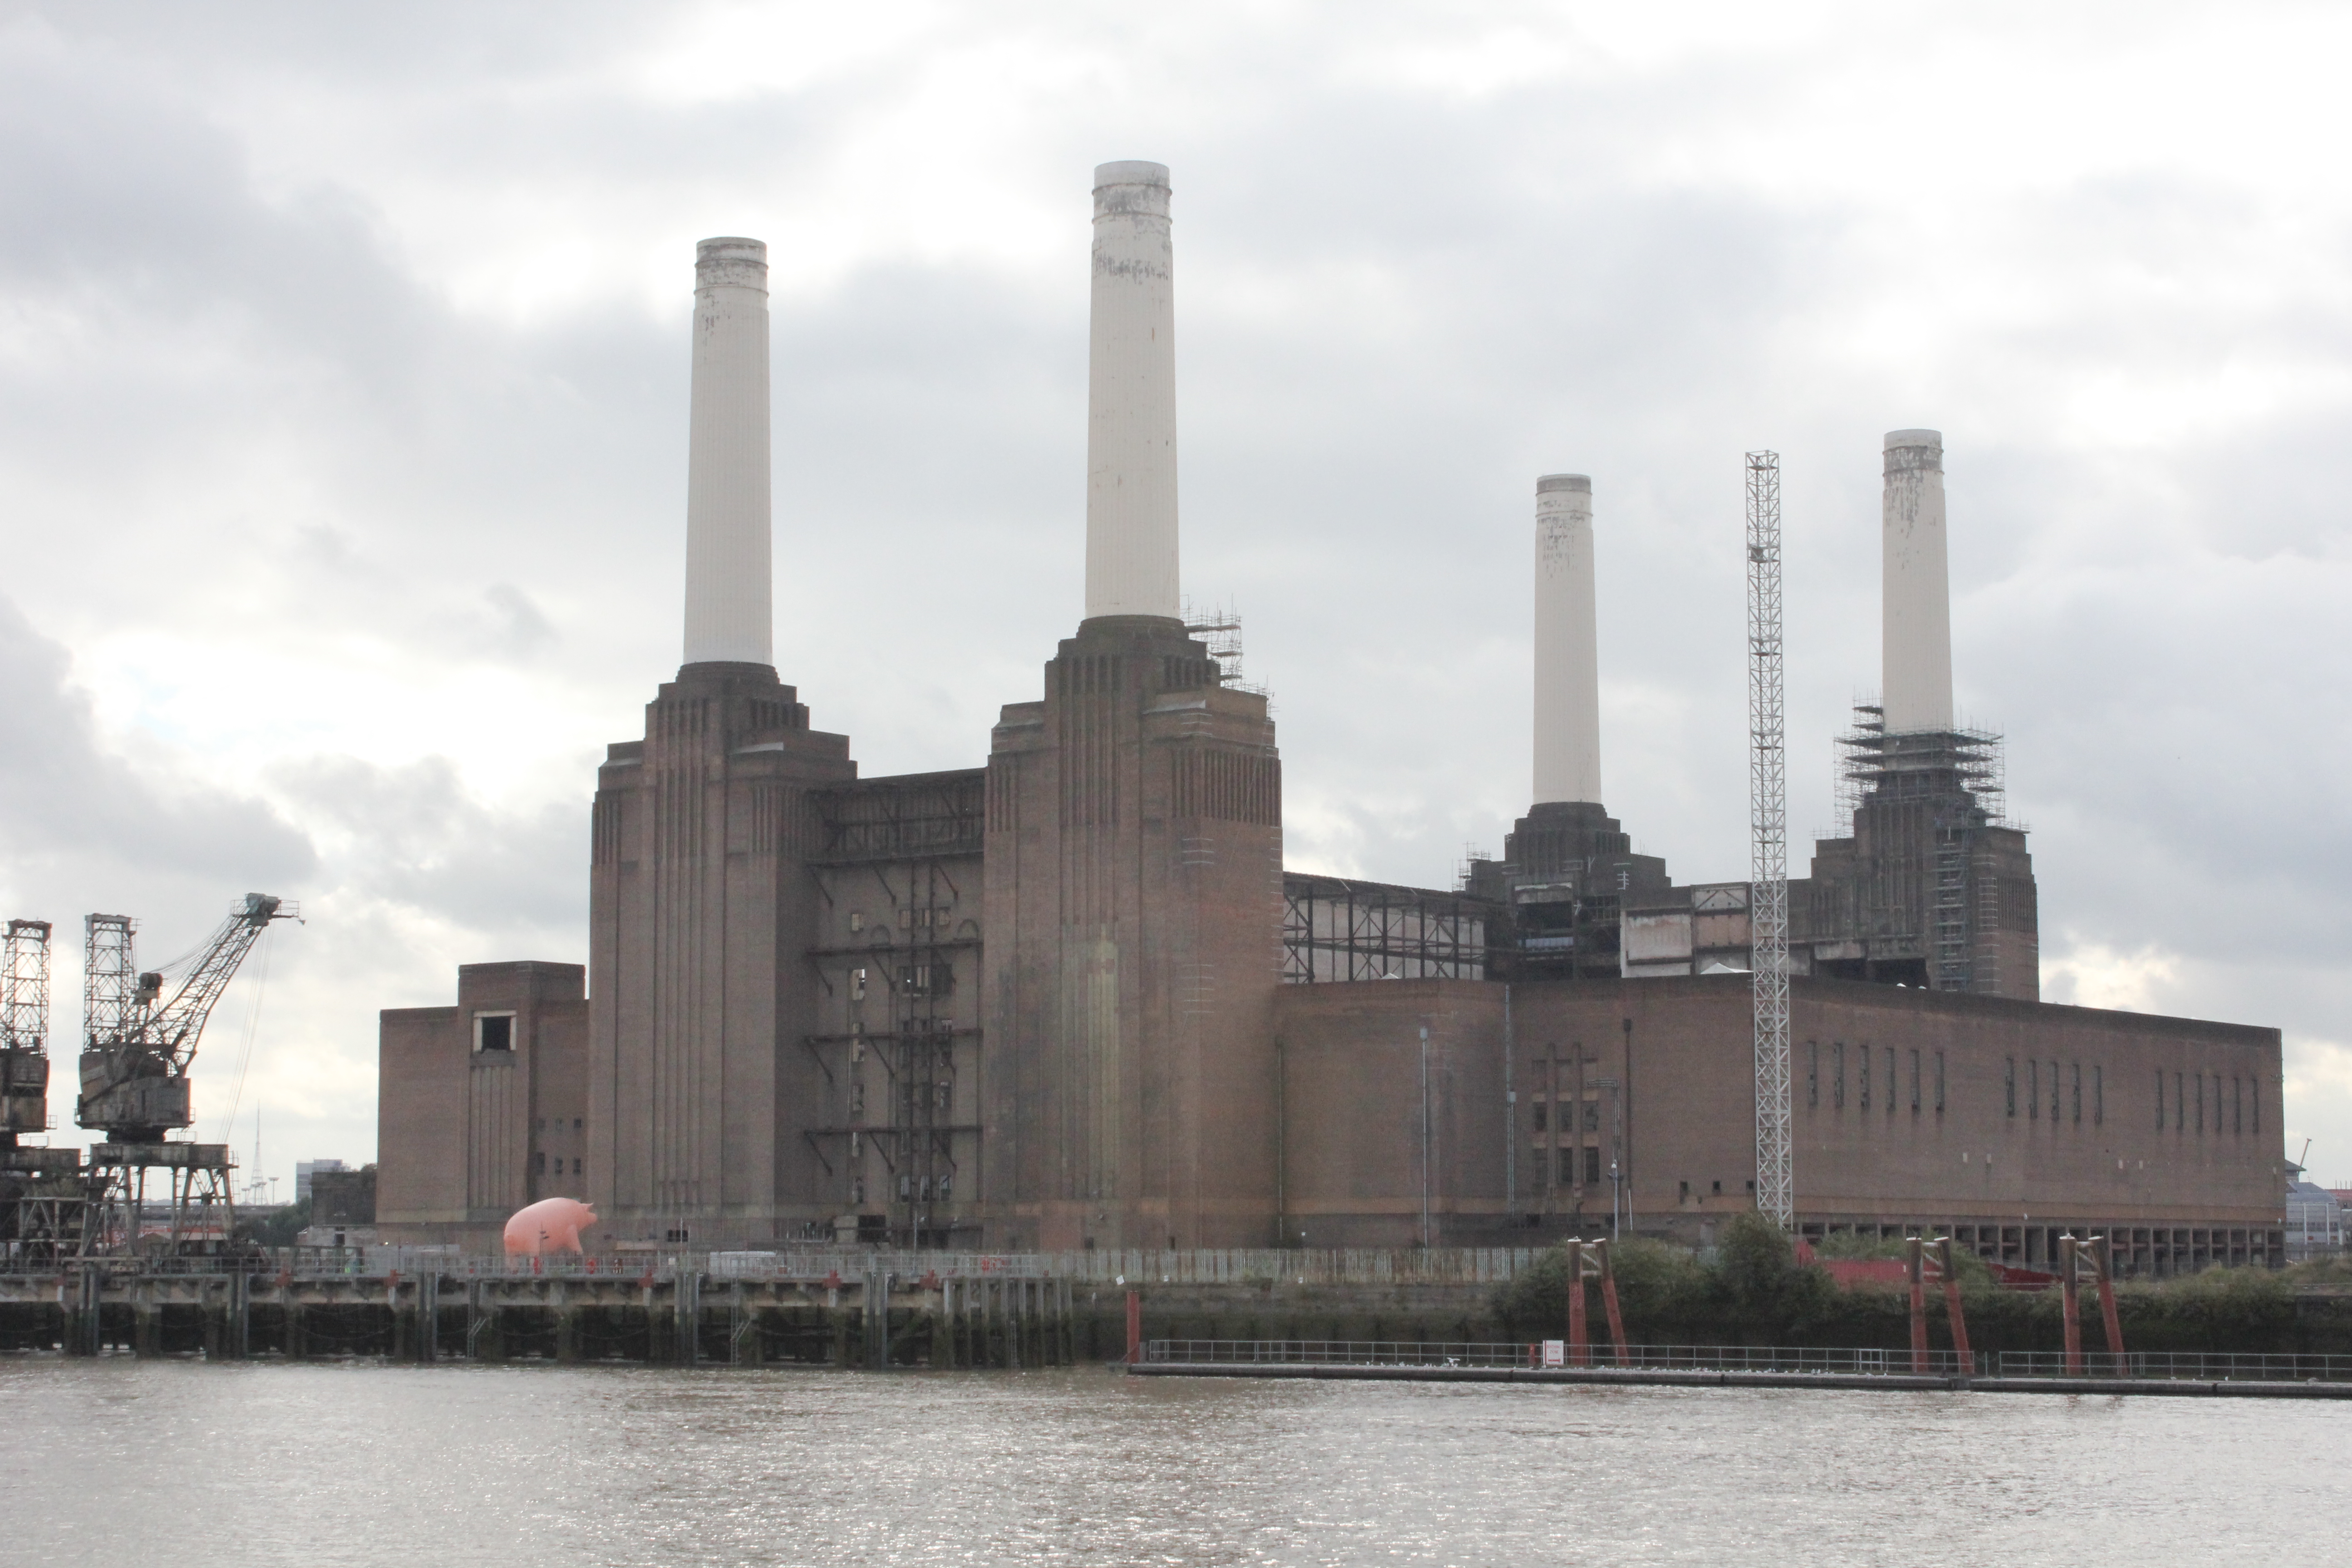 Letter to English Heritage from Battersea Power Station Community Group